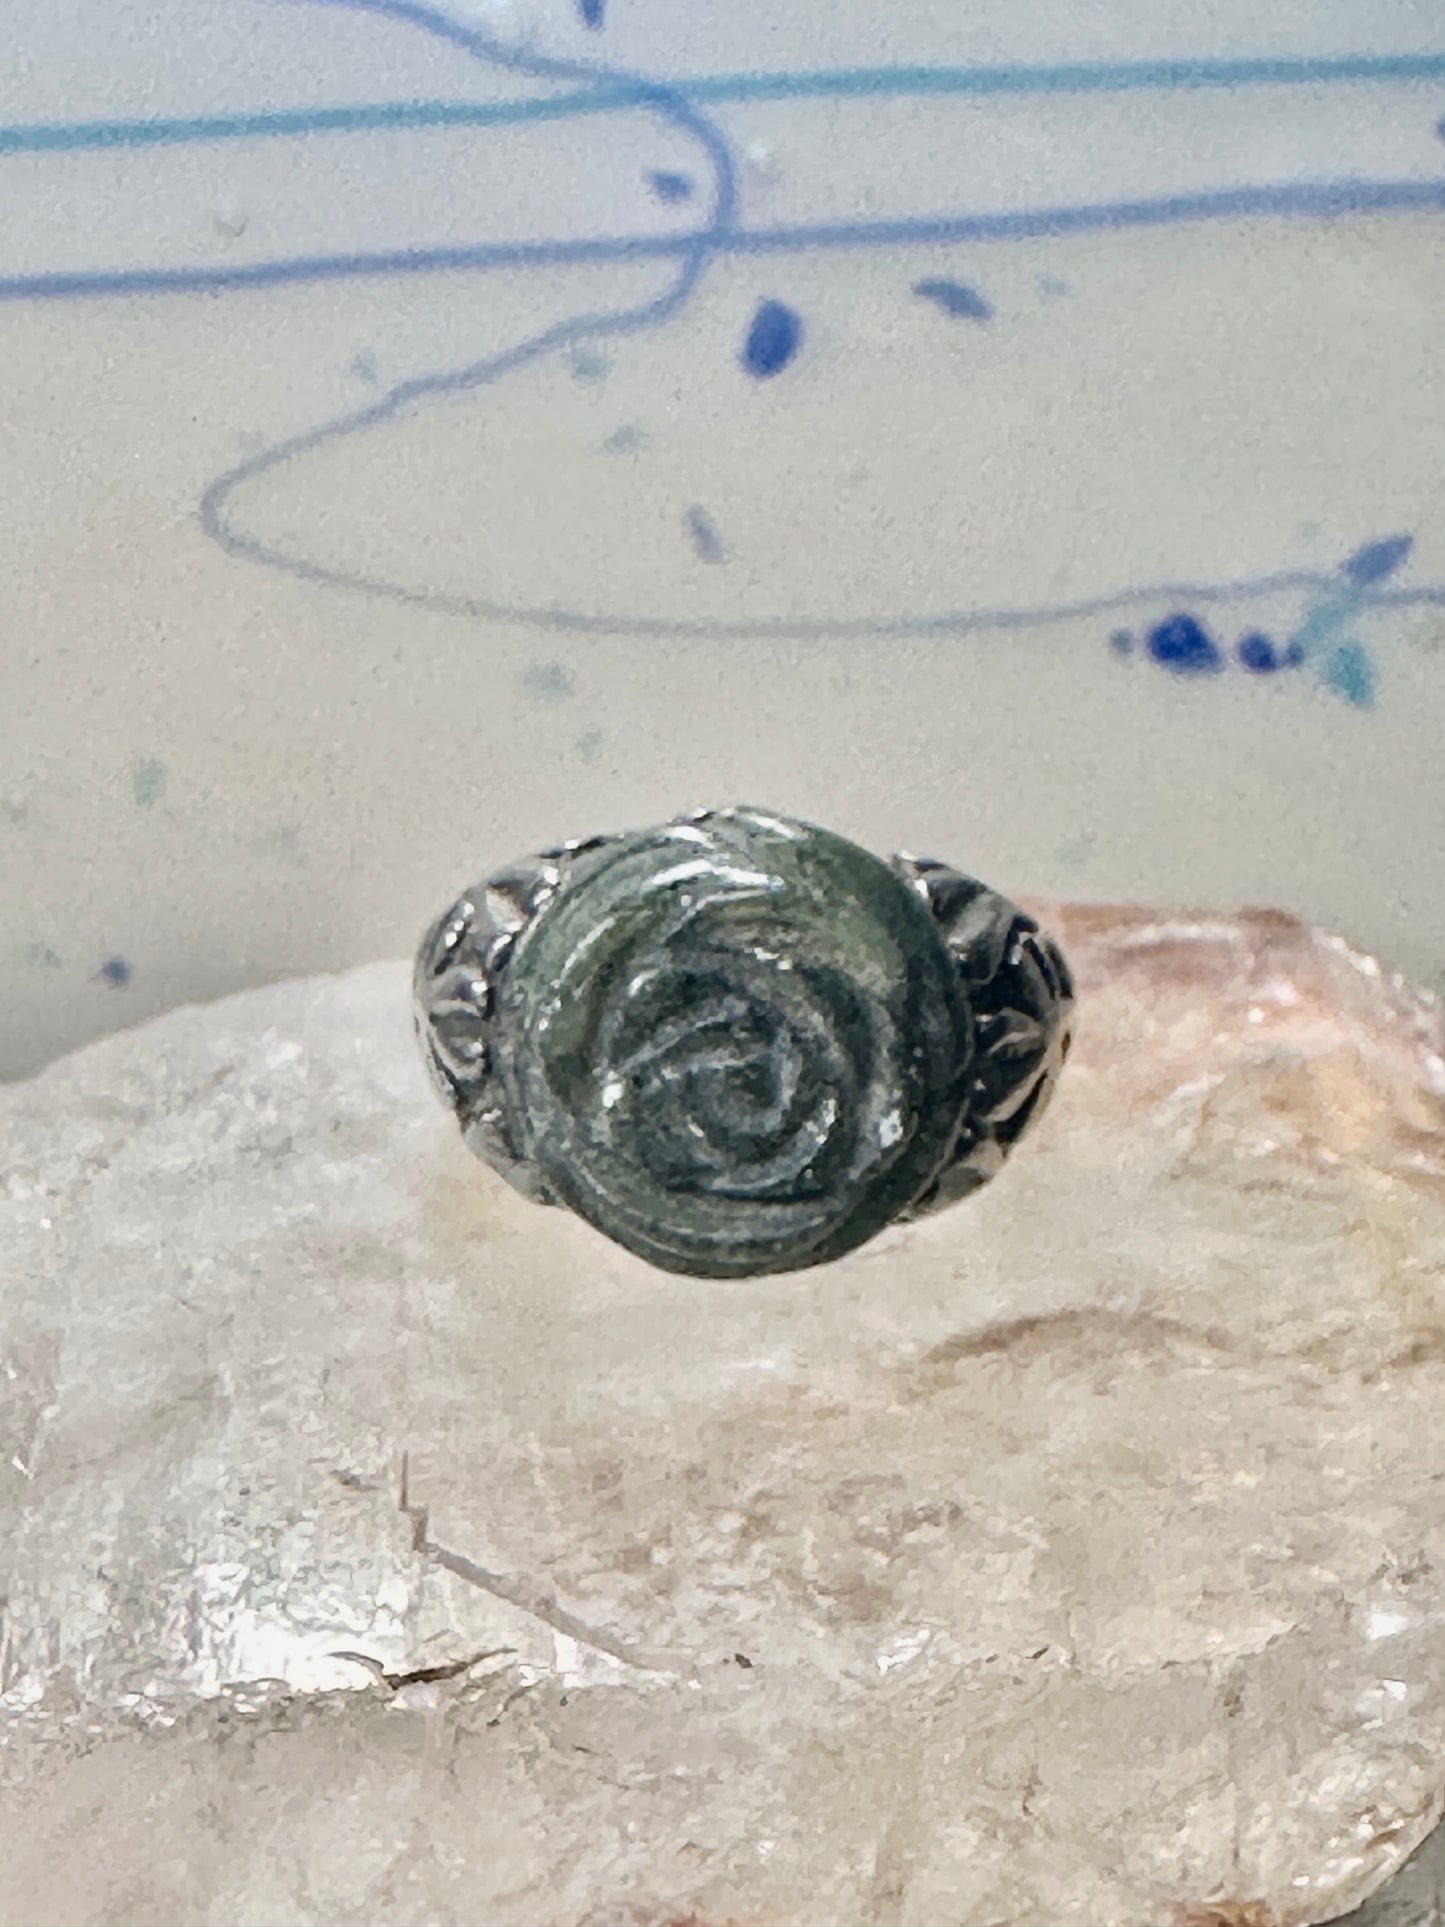 Rose ring Irish connemara marble marble floral size 7 sterling silver women 6.8g